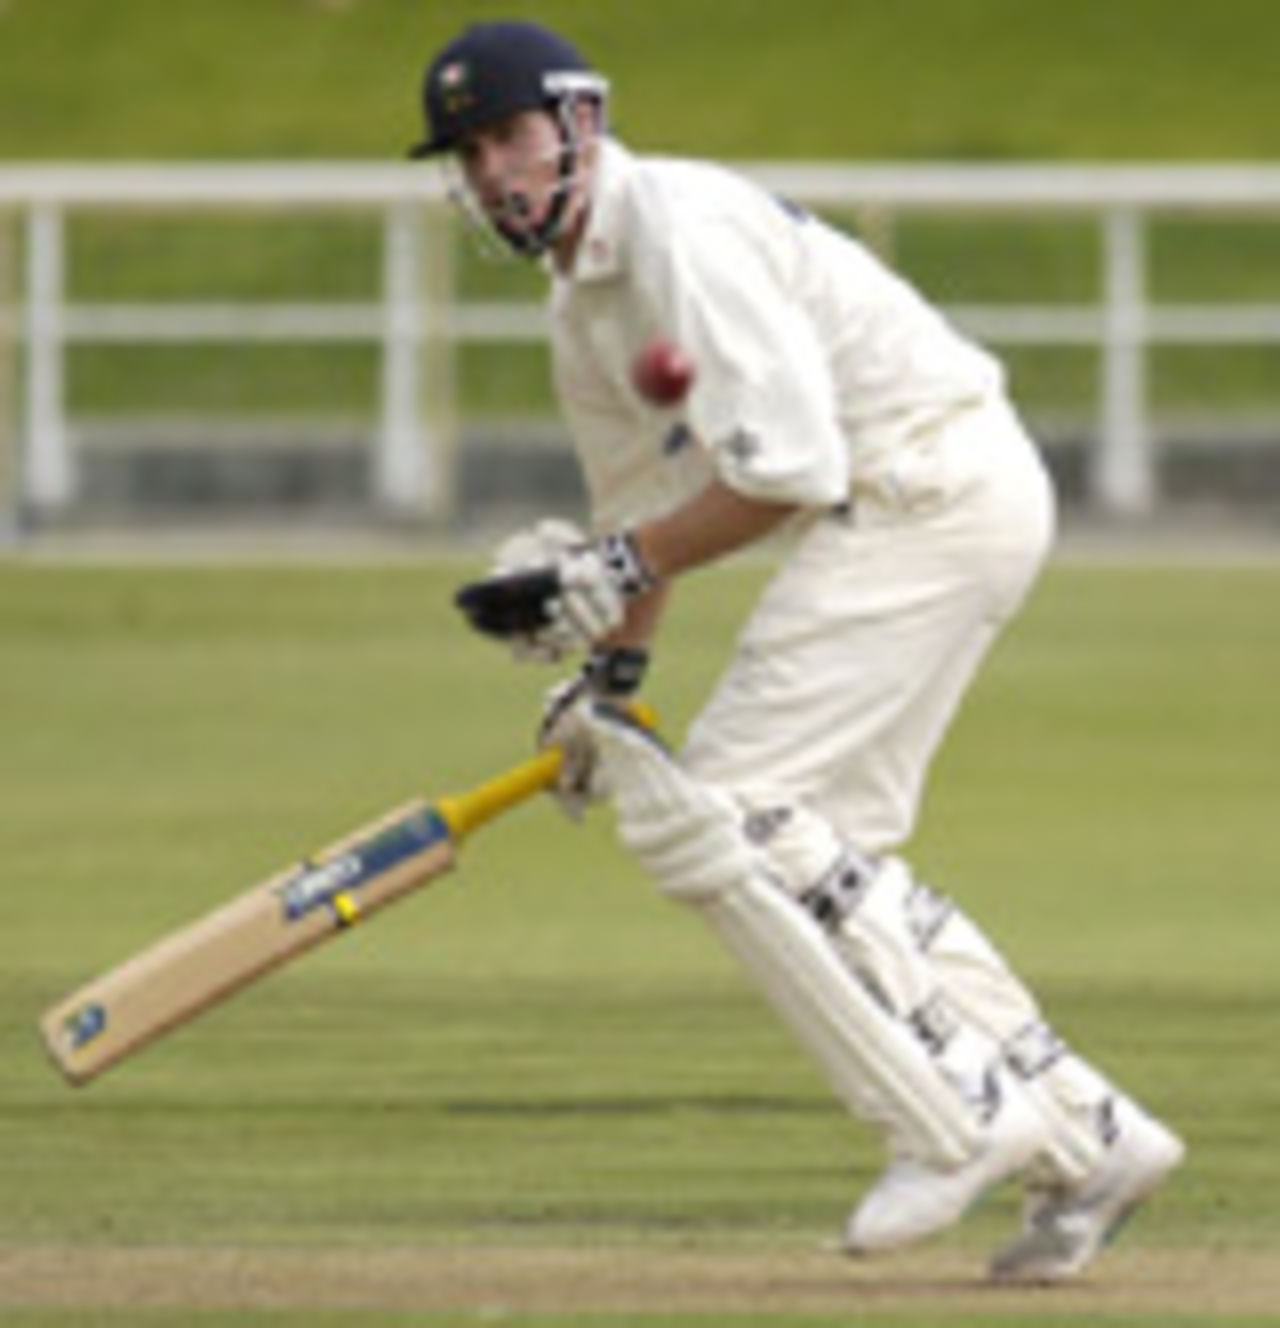 Neil Johnson on his way to scoring a century against North West